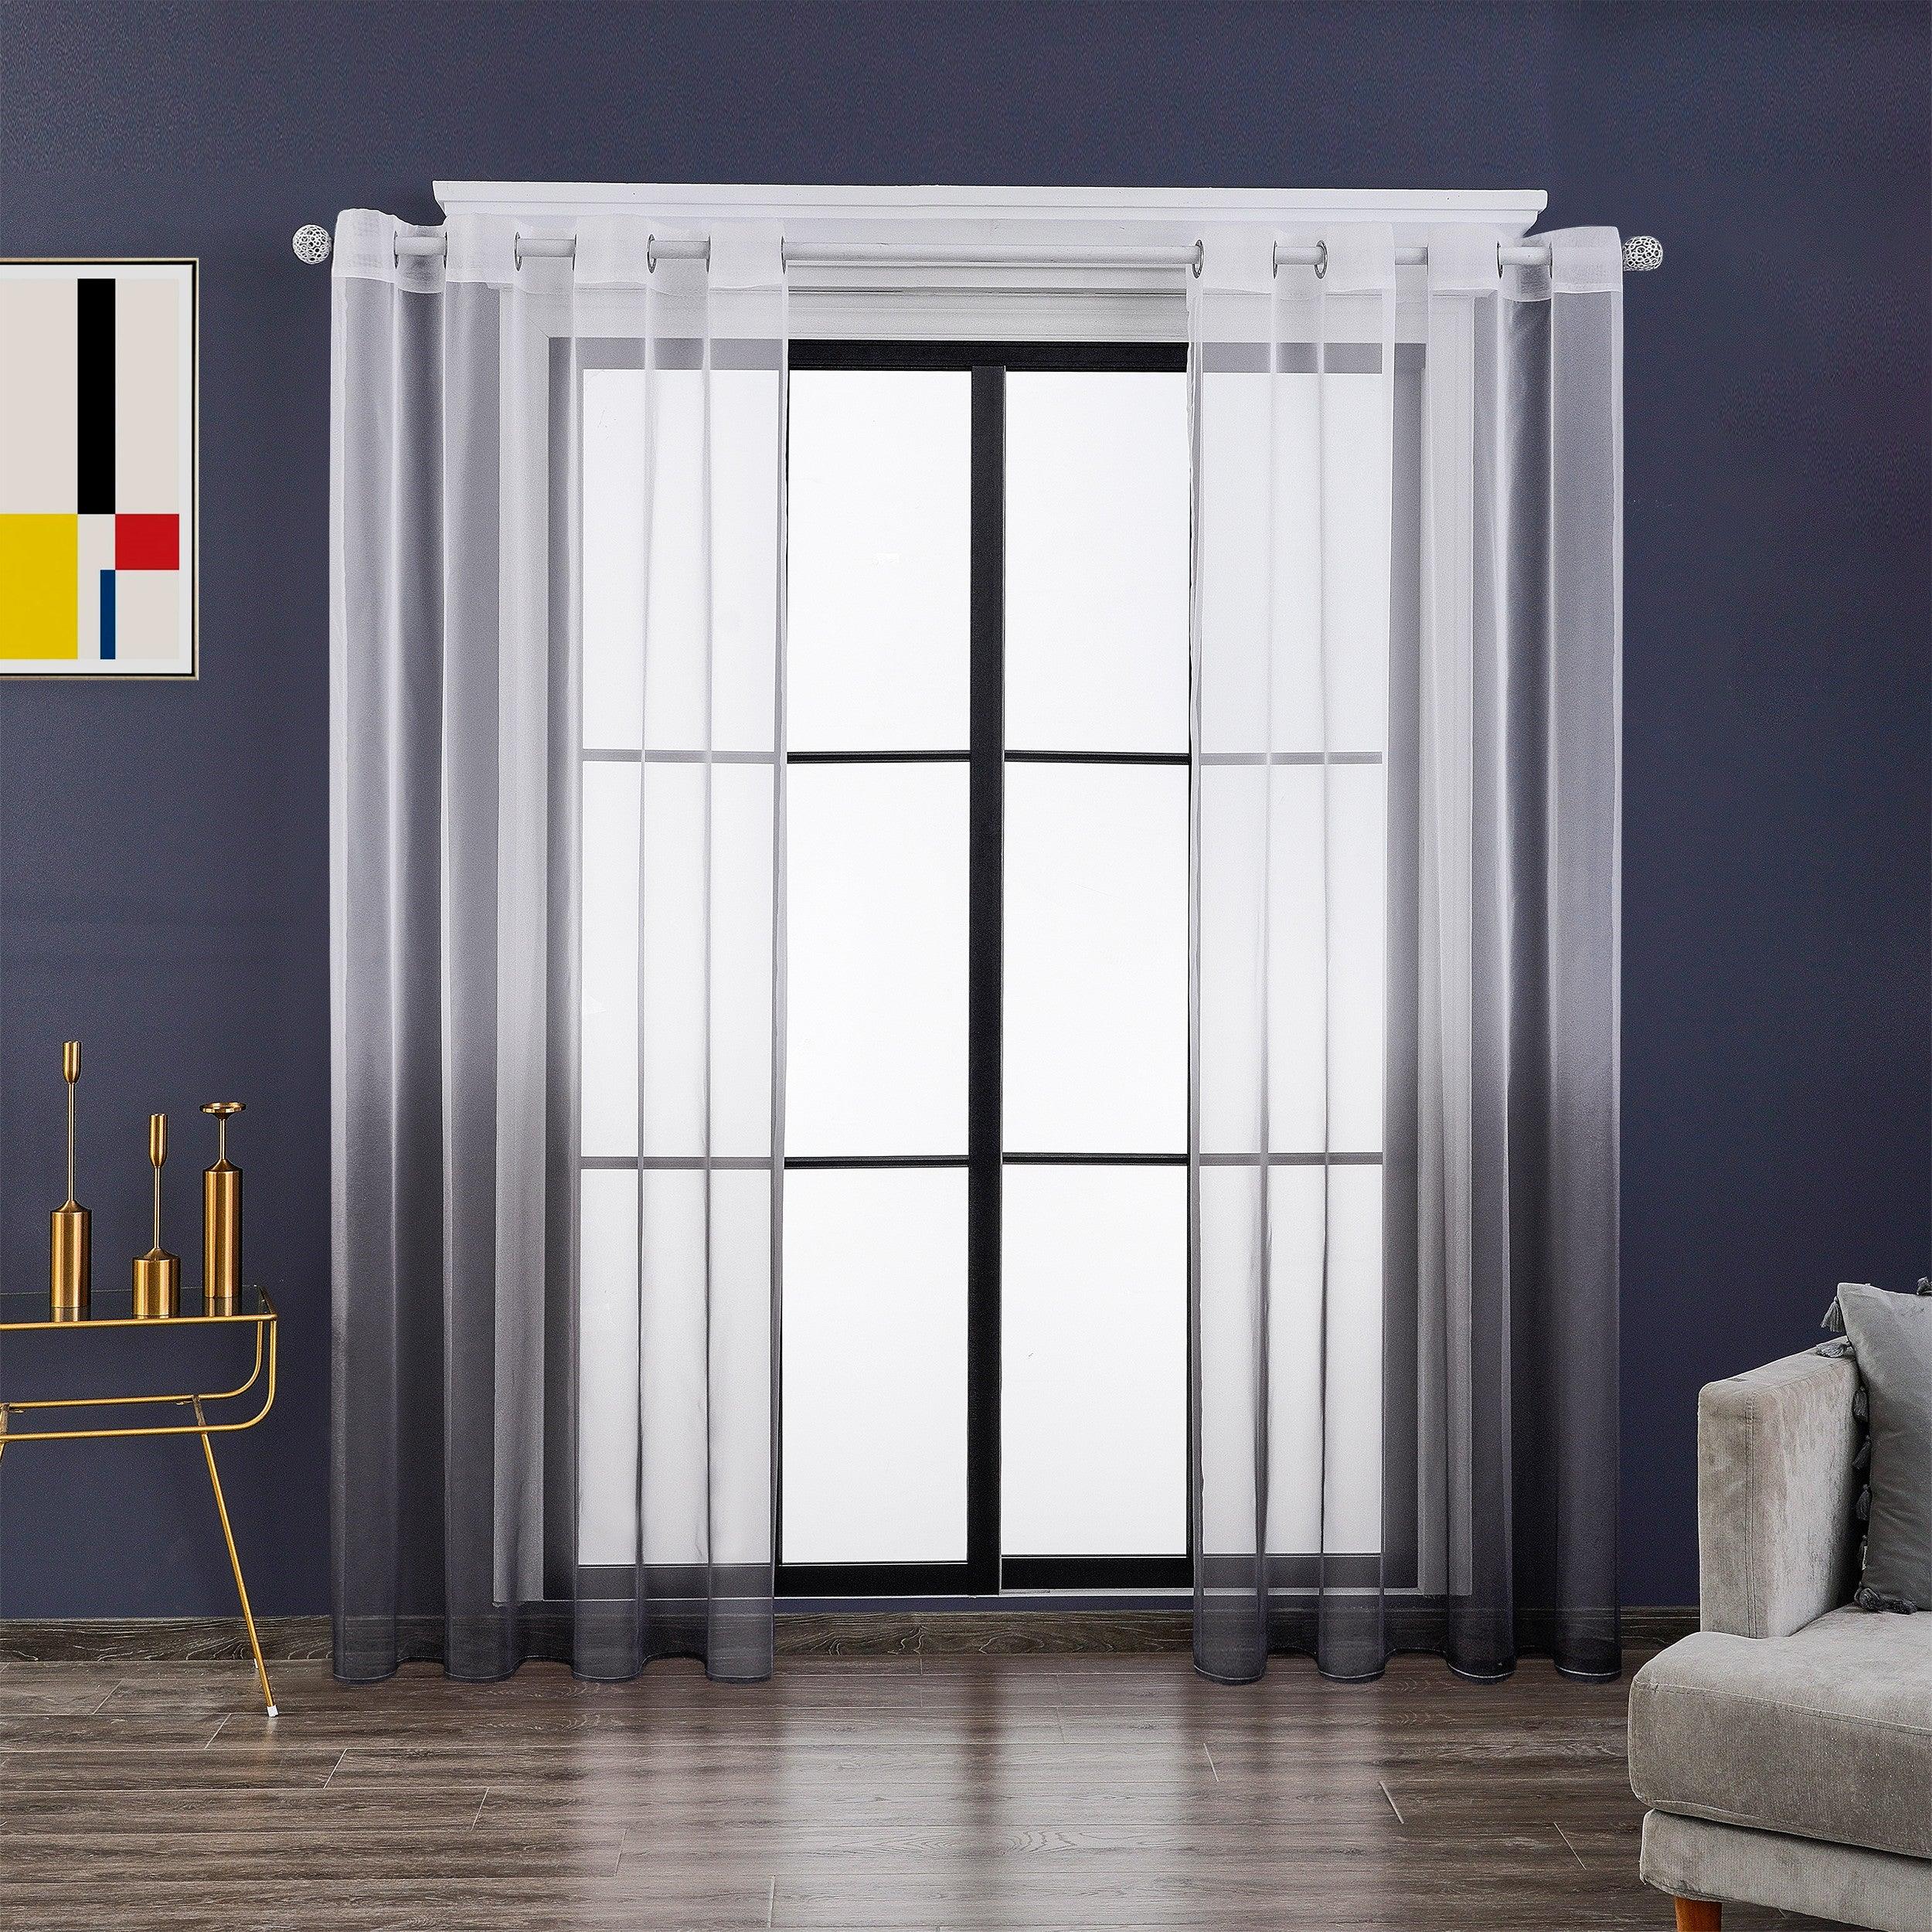 Modern Curtain Designs- Ombre White Sheer Curtain Outdoor Suit For Party, Wedding Backdrops,Bedroom,1 Panel - Topfinel